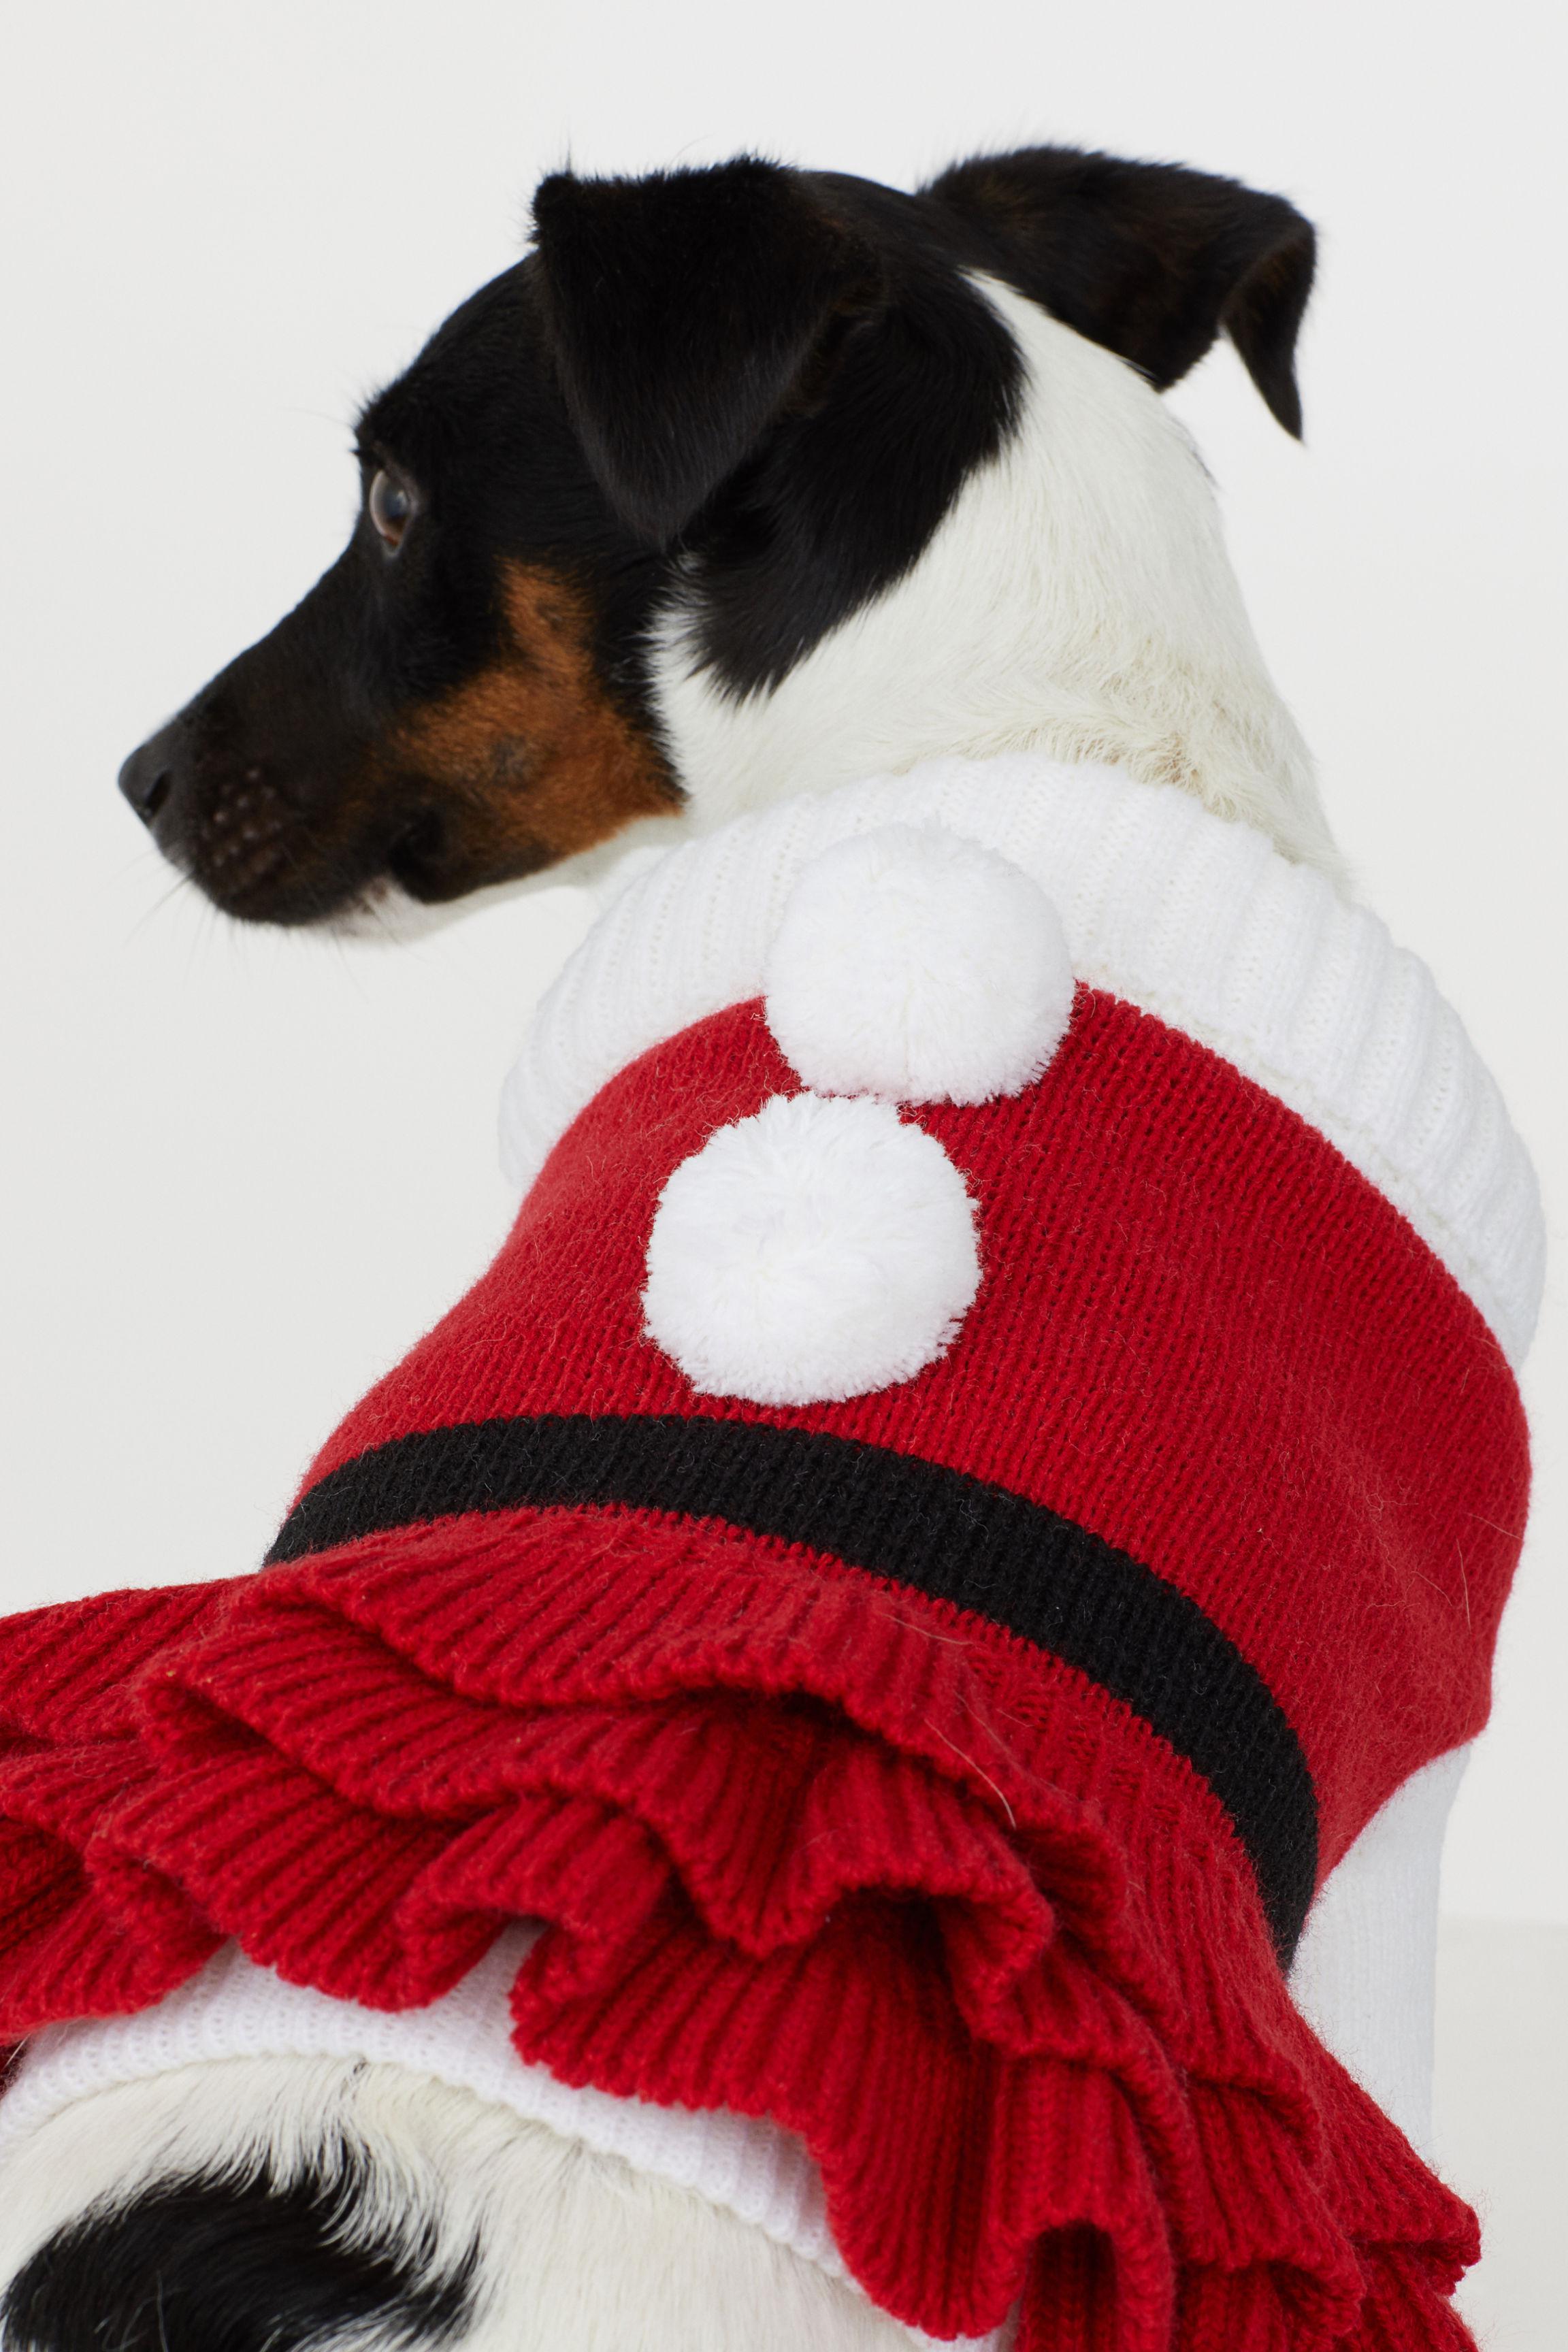 h and m dog clothes > Up to 63% OFF > Free shipping